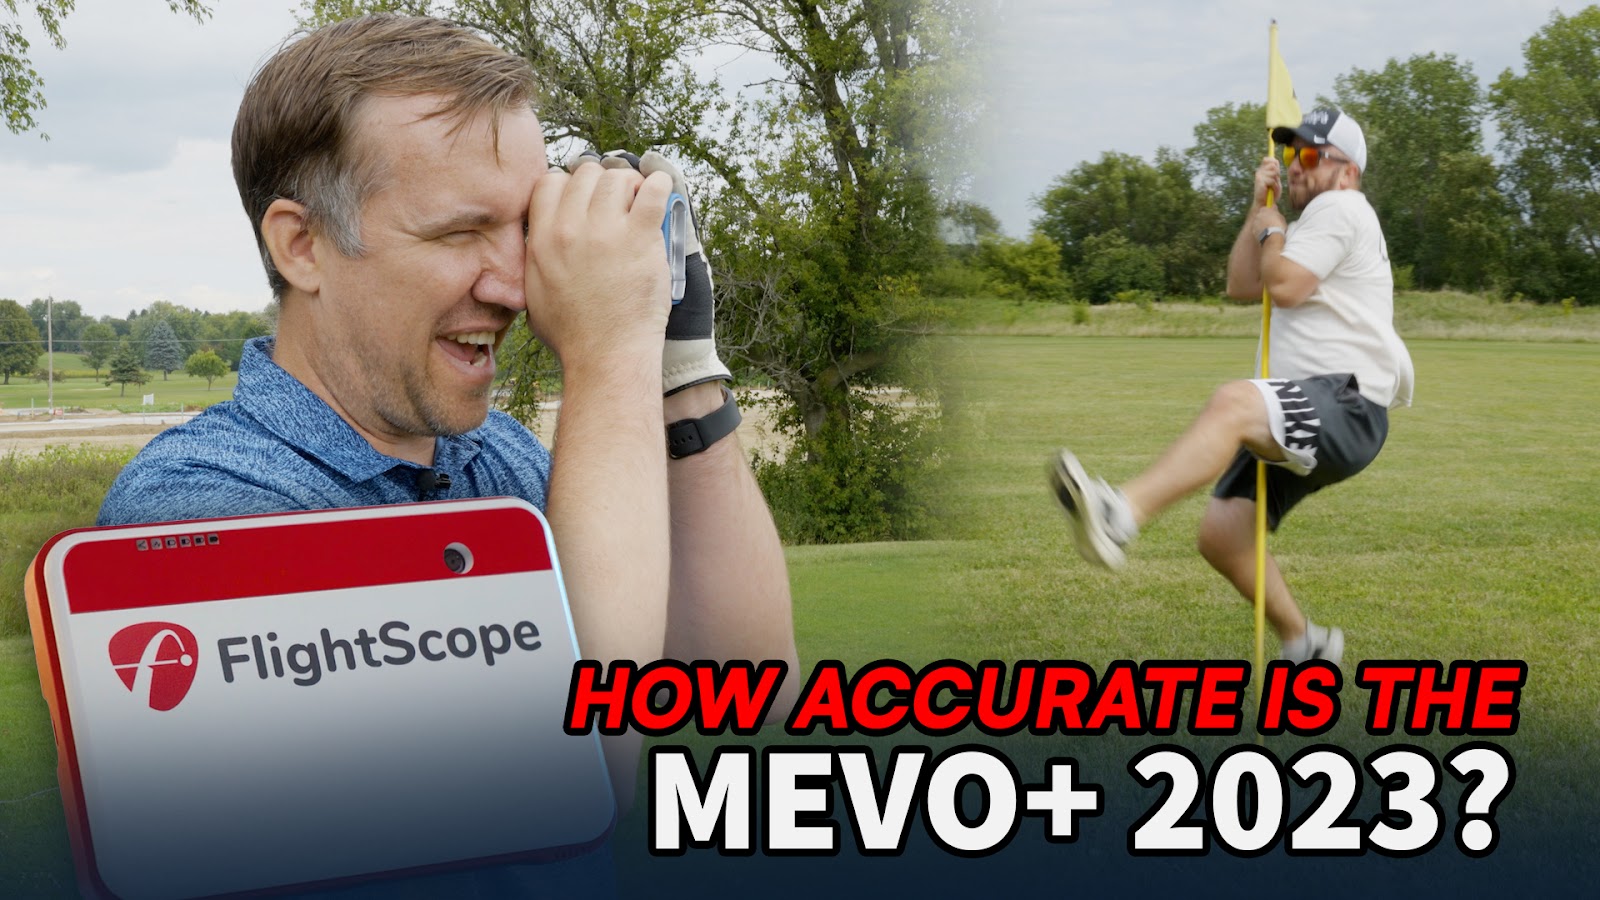 Thumbnail preview for Mevo+ accuracy test